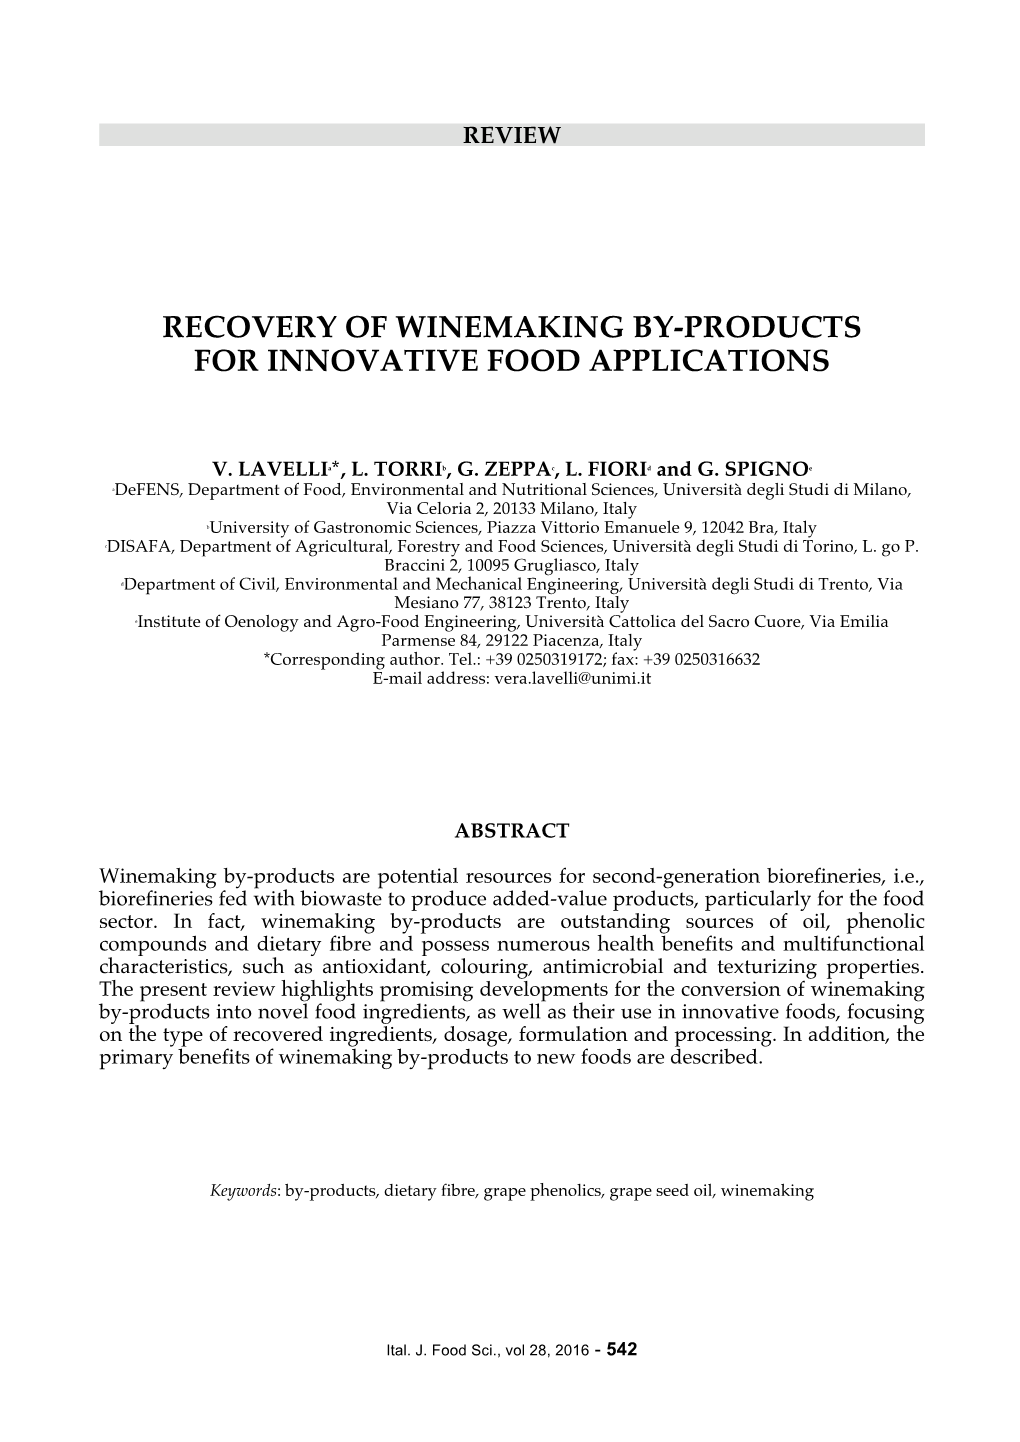 Recovery of Winemaking By-Products for Innovative Food Applications